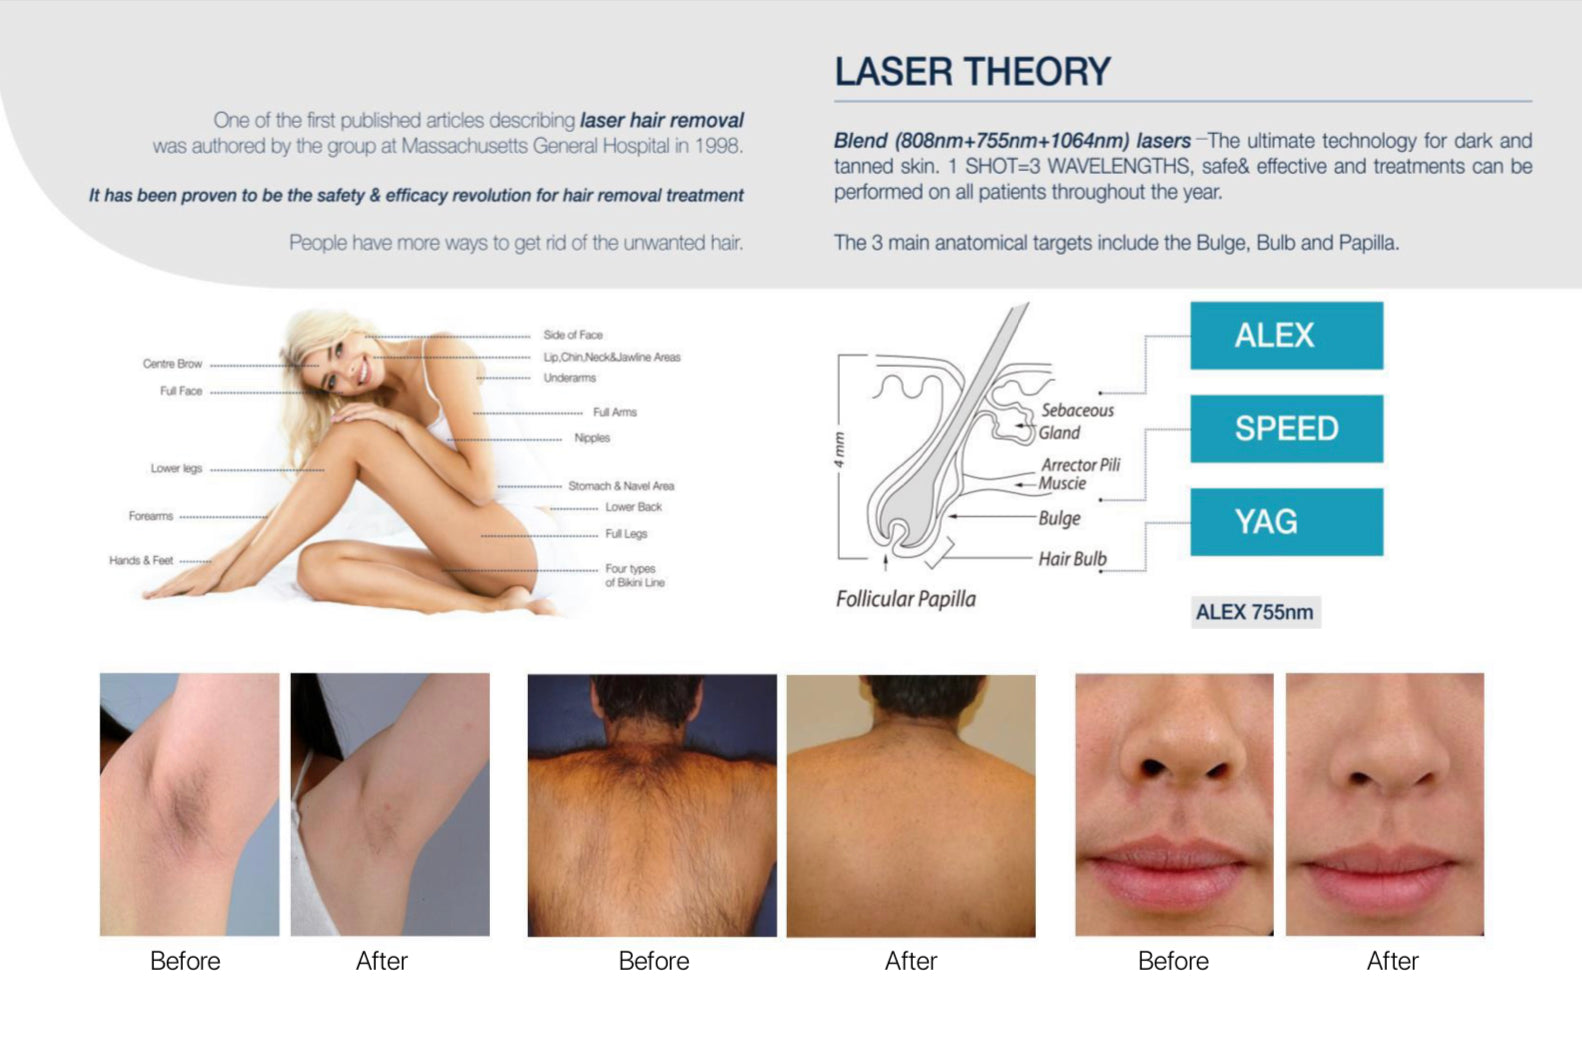 laser theory with 3 wavelengths, woman with smooth skin, body parts before and after treatment.